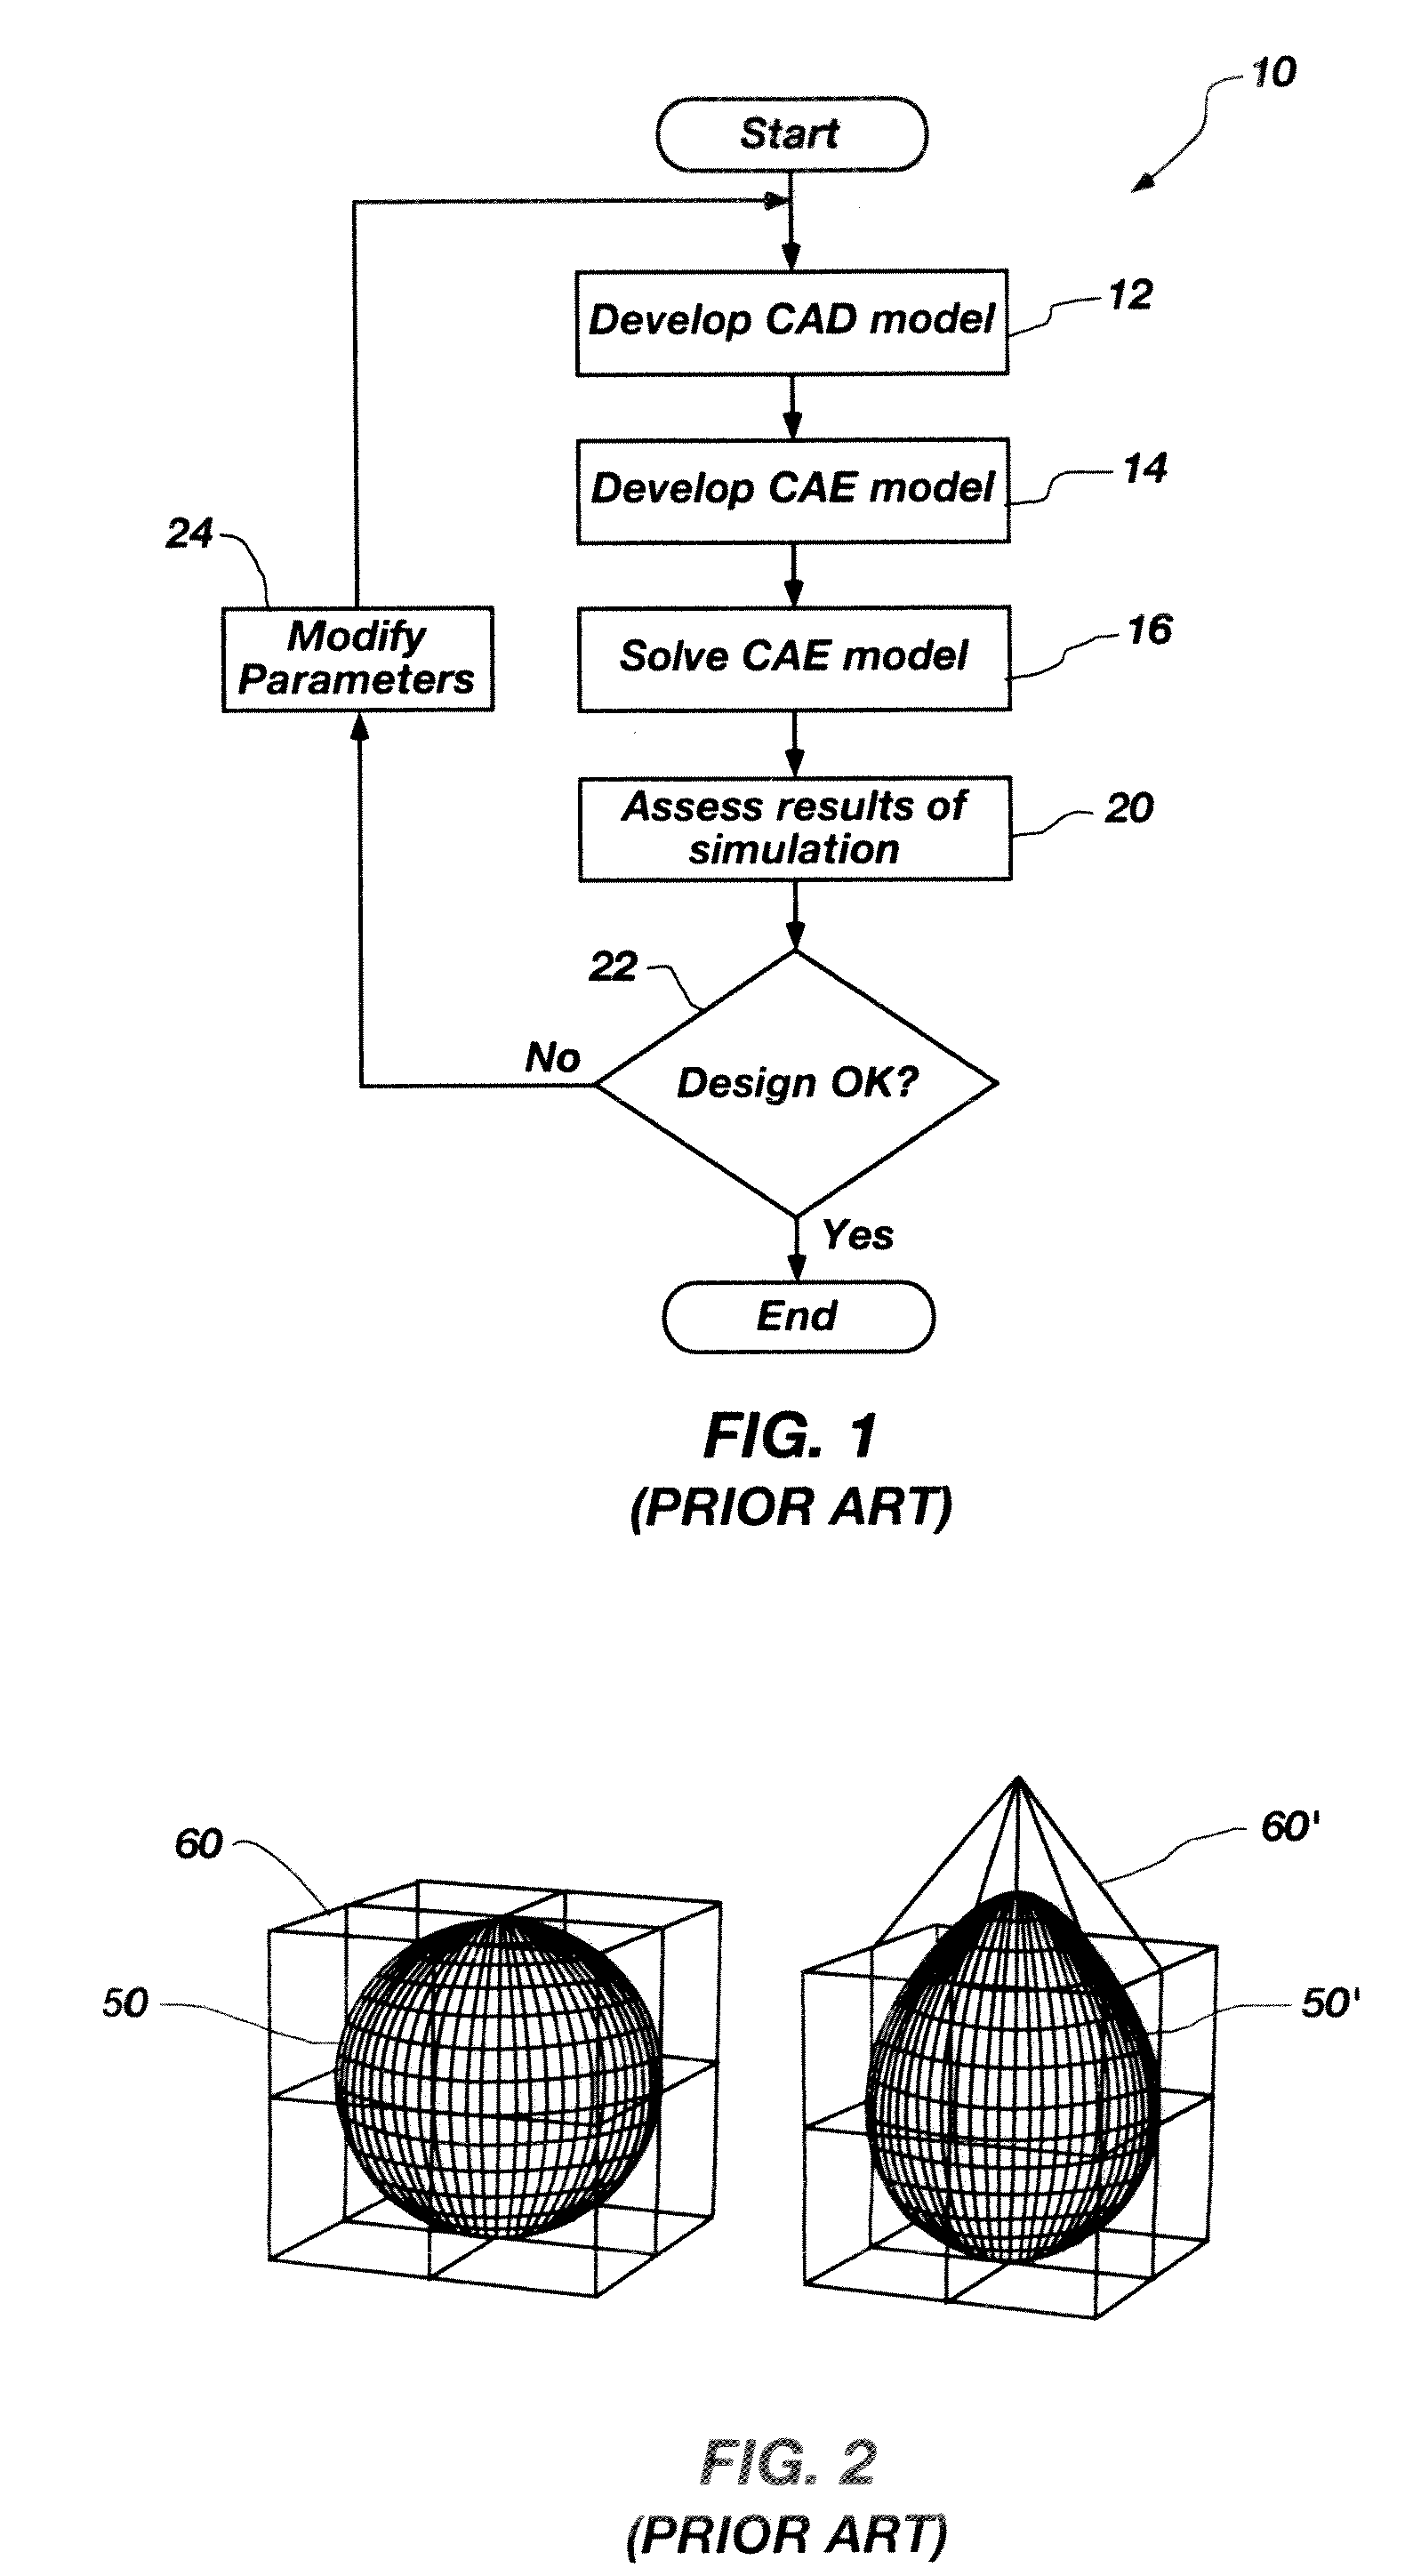 System, methods, and computer readable media, for product design using coupled computer aided engineering models